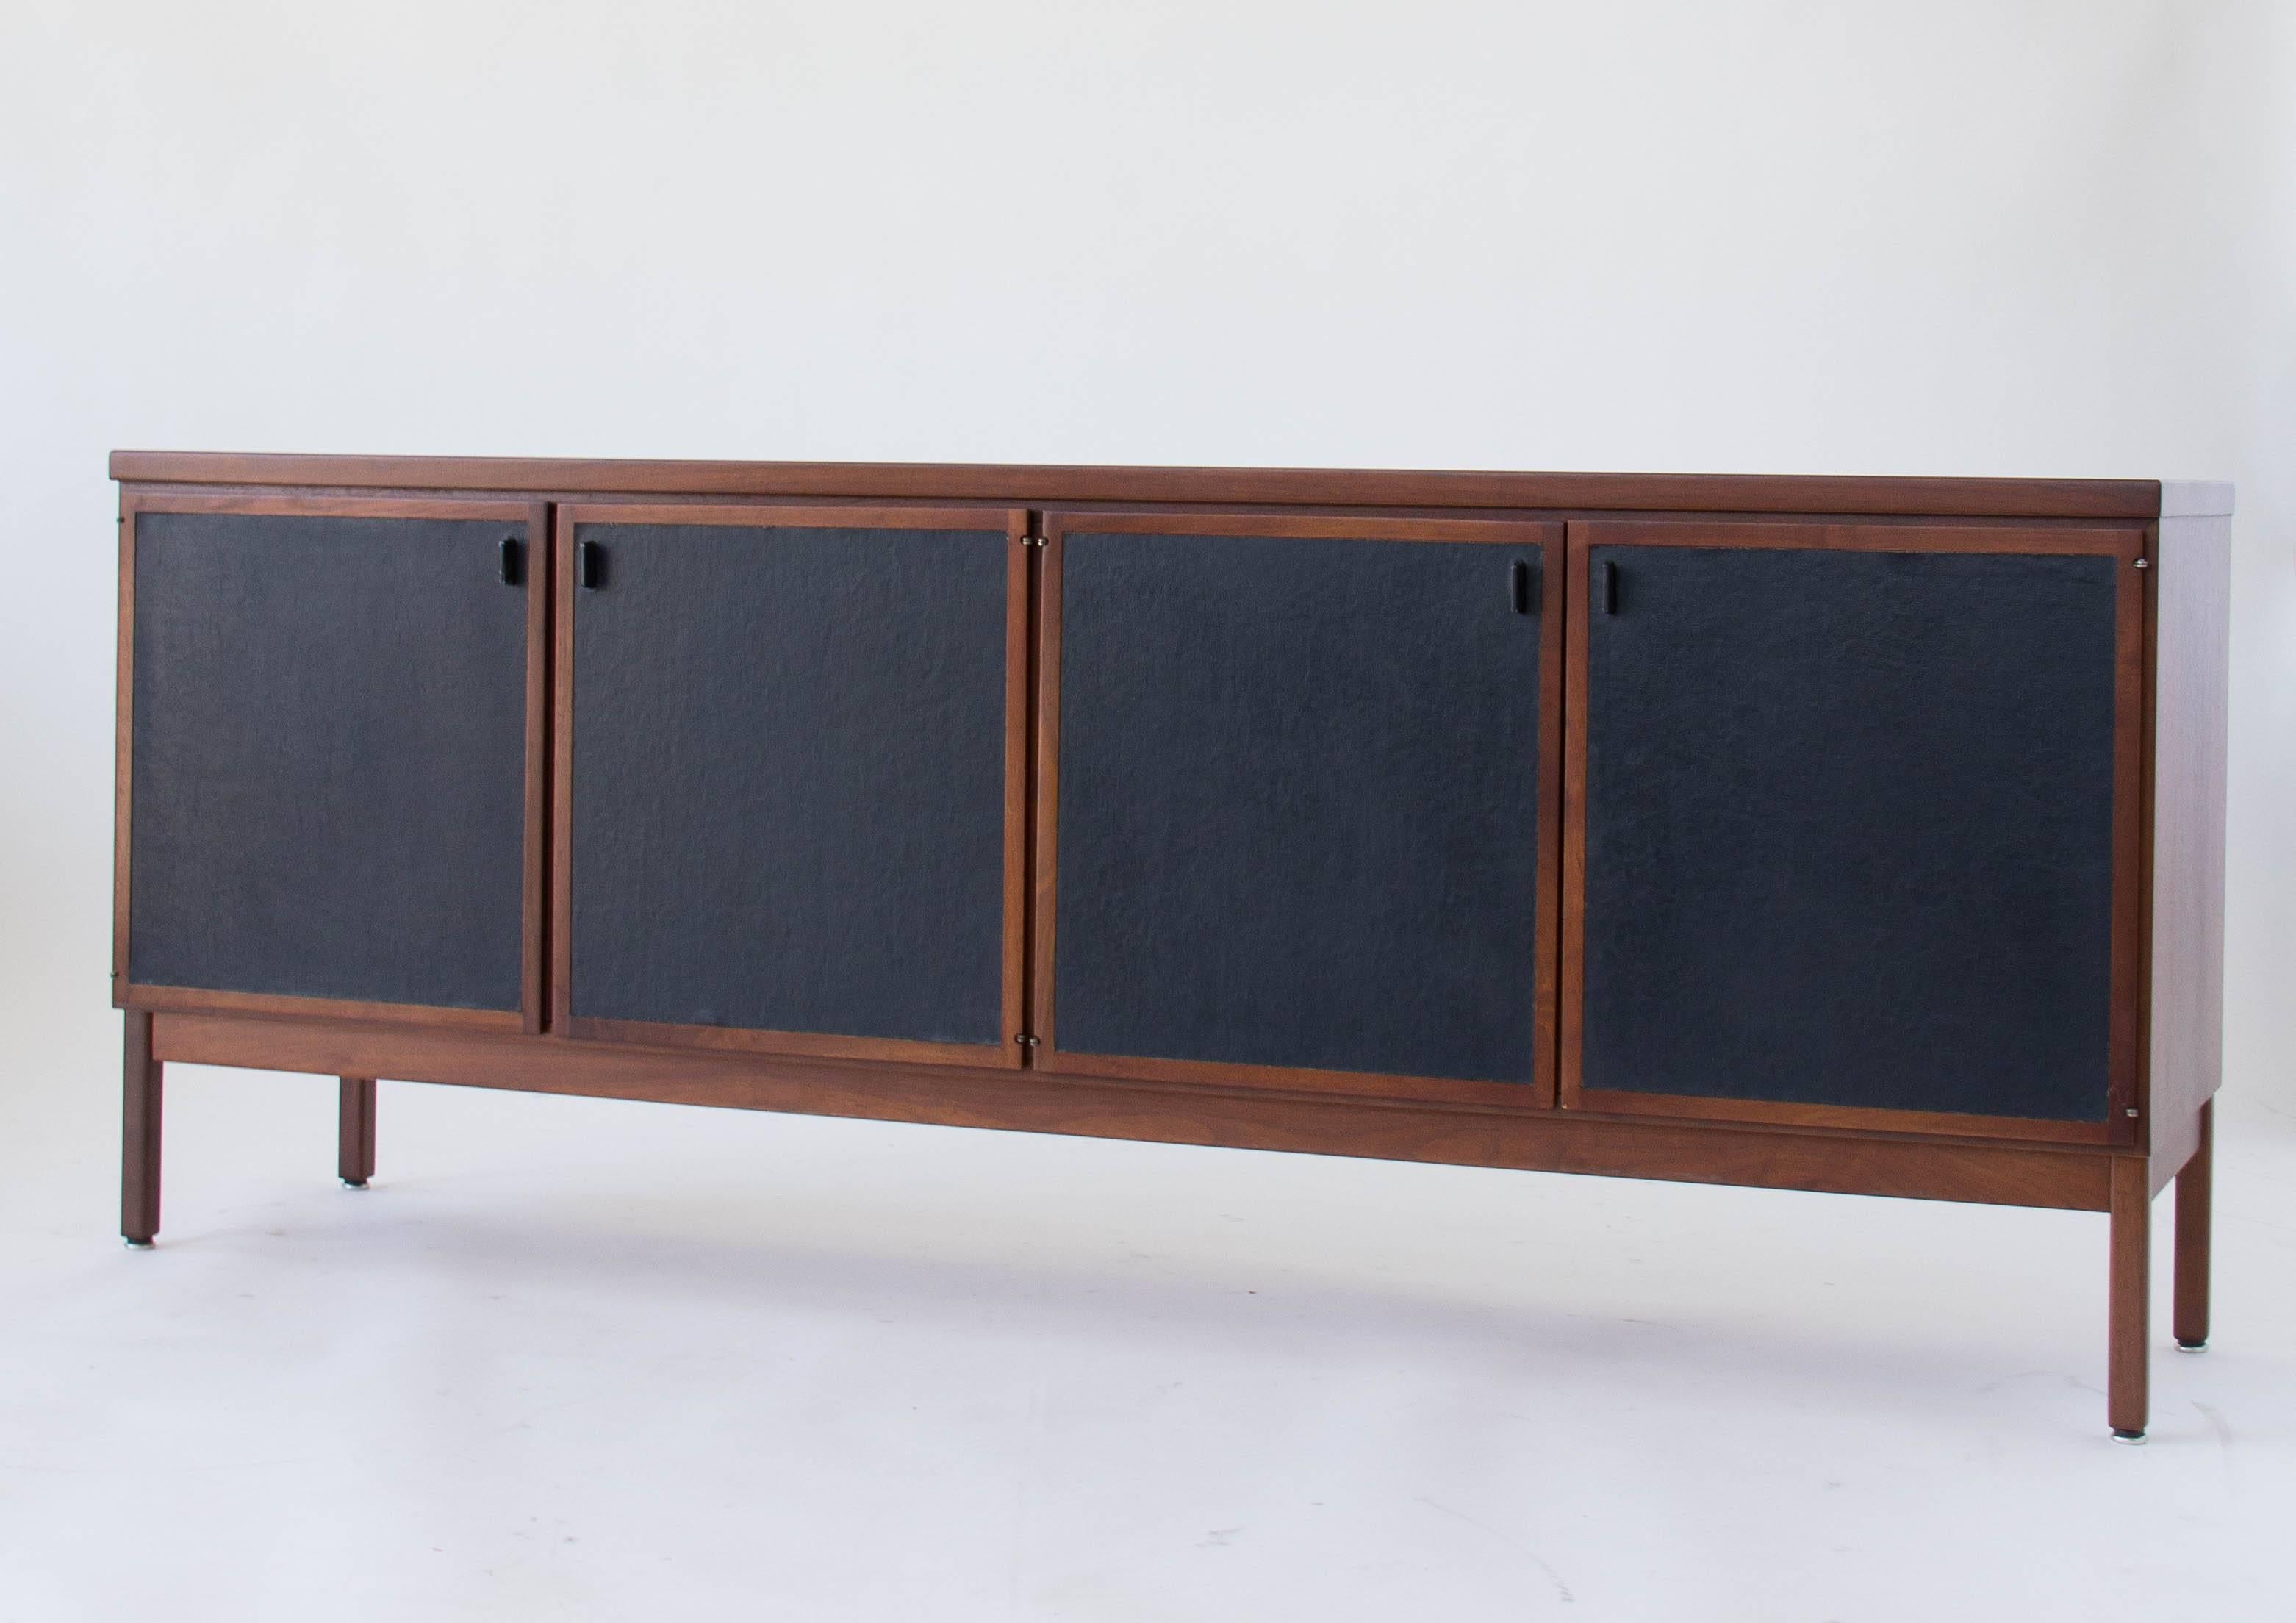 American Mid-Century Modern Walnut Credenza with Leather-Paneled Doors